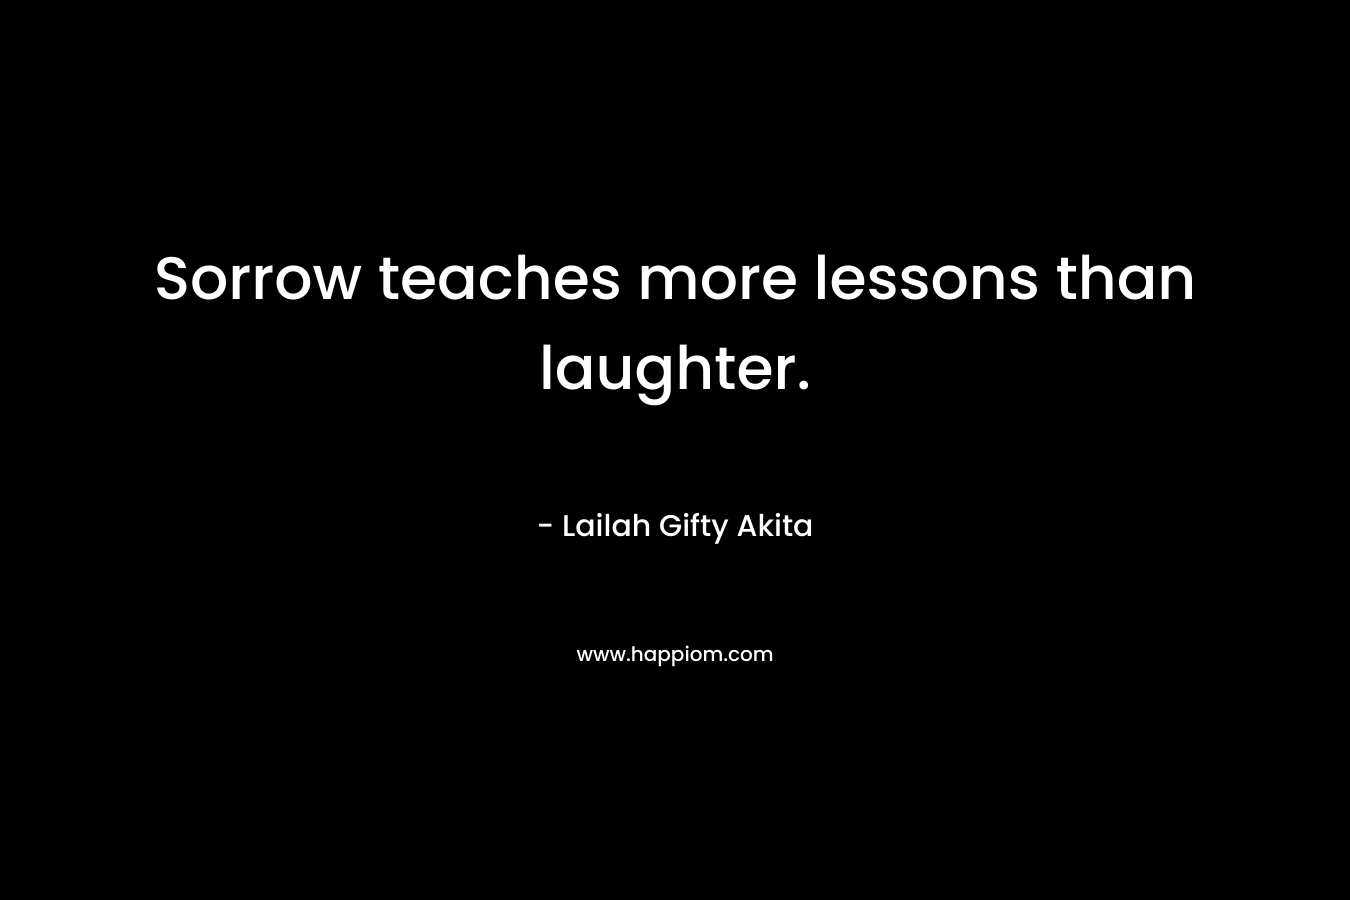 Sorrow teaches more lessons than laughter. – Lailah Gifty Akita